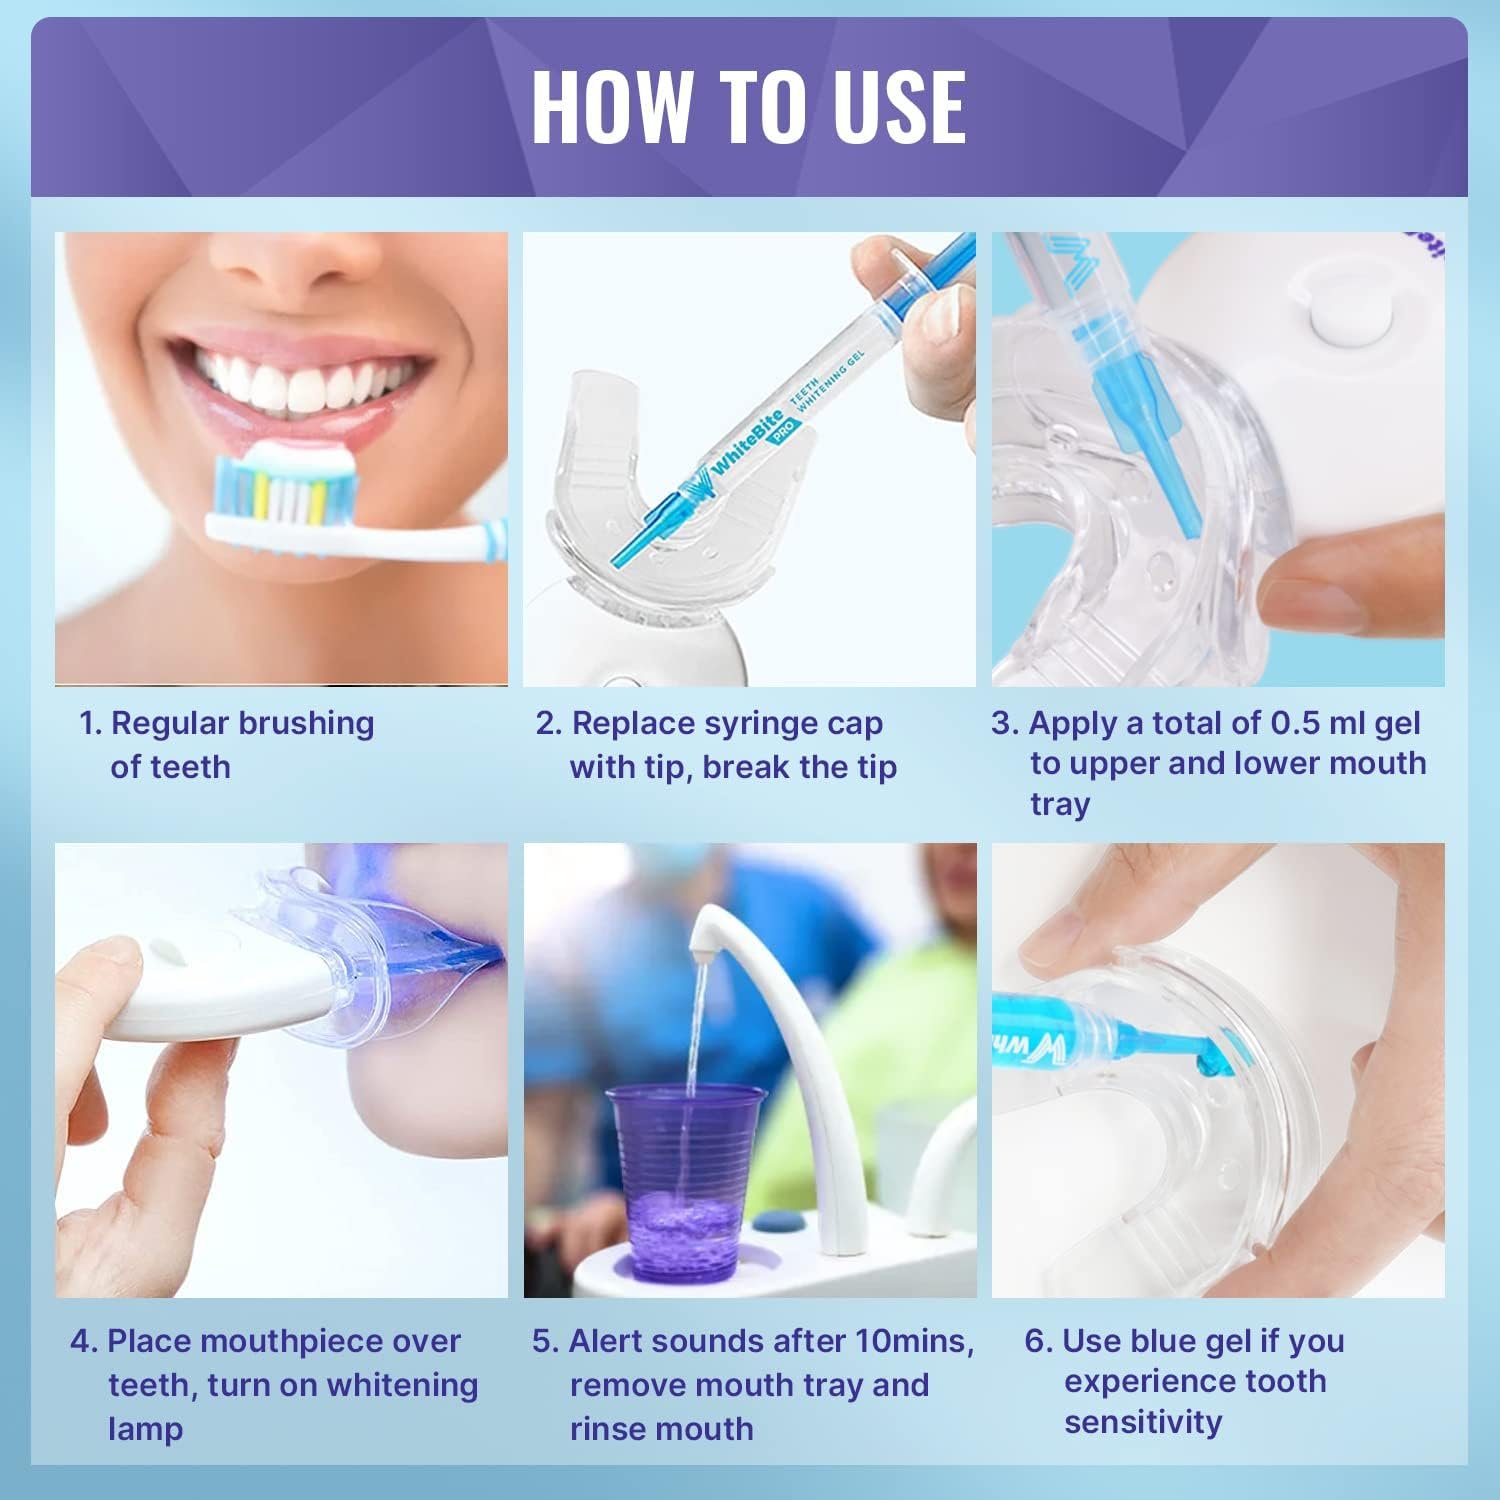 Teeth Whitening Kit LED Light: Whitebite Pro Tooth Whitener with Carbamide Peroxide Gel for Sensitive Teeth - Professional Dental System with Mouth Tray for a Bright White Smile